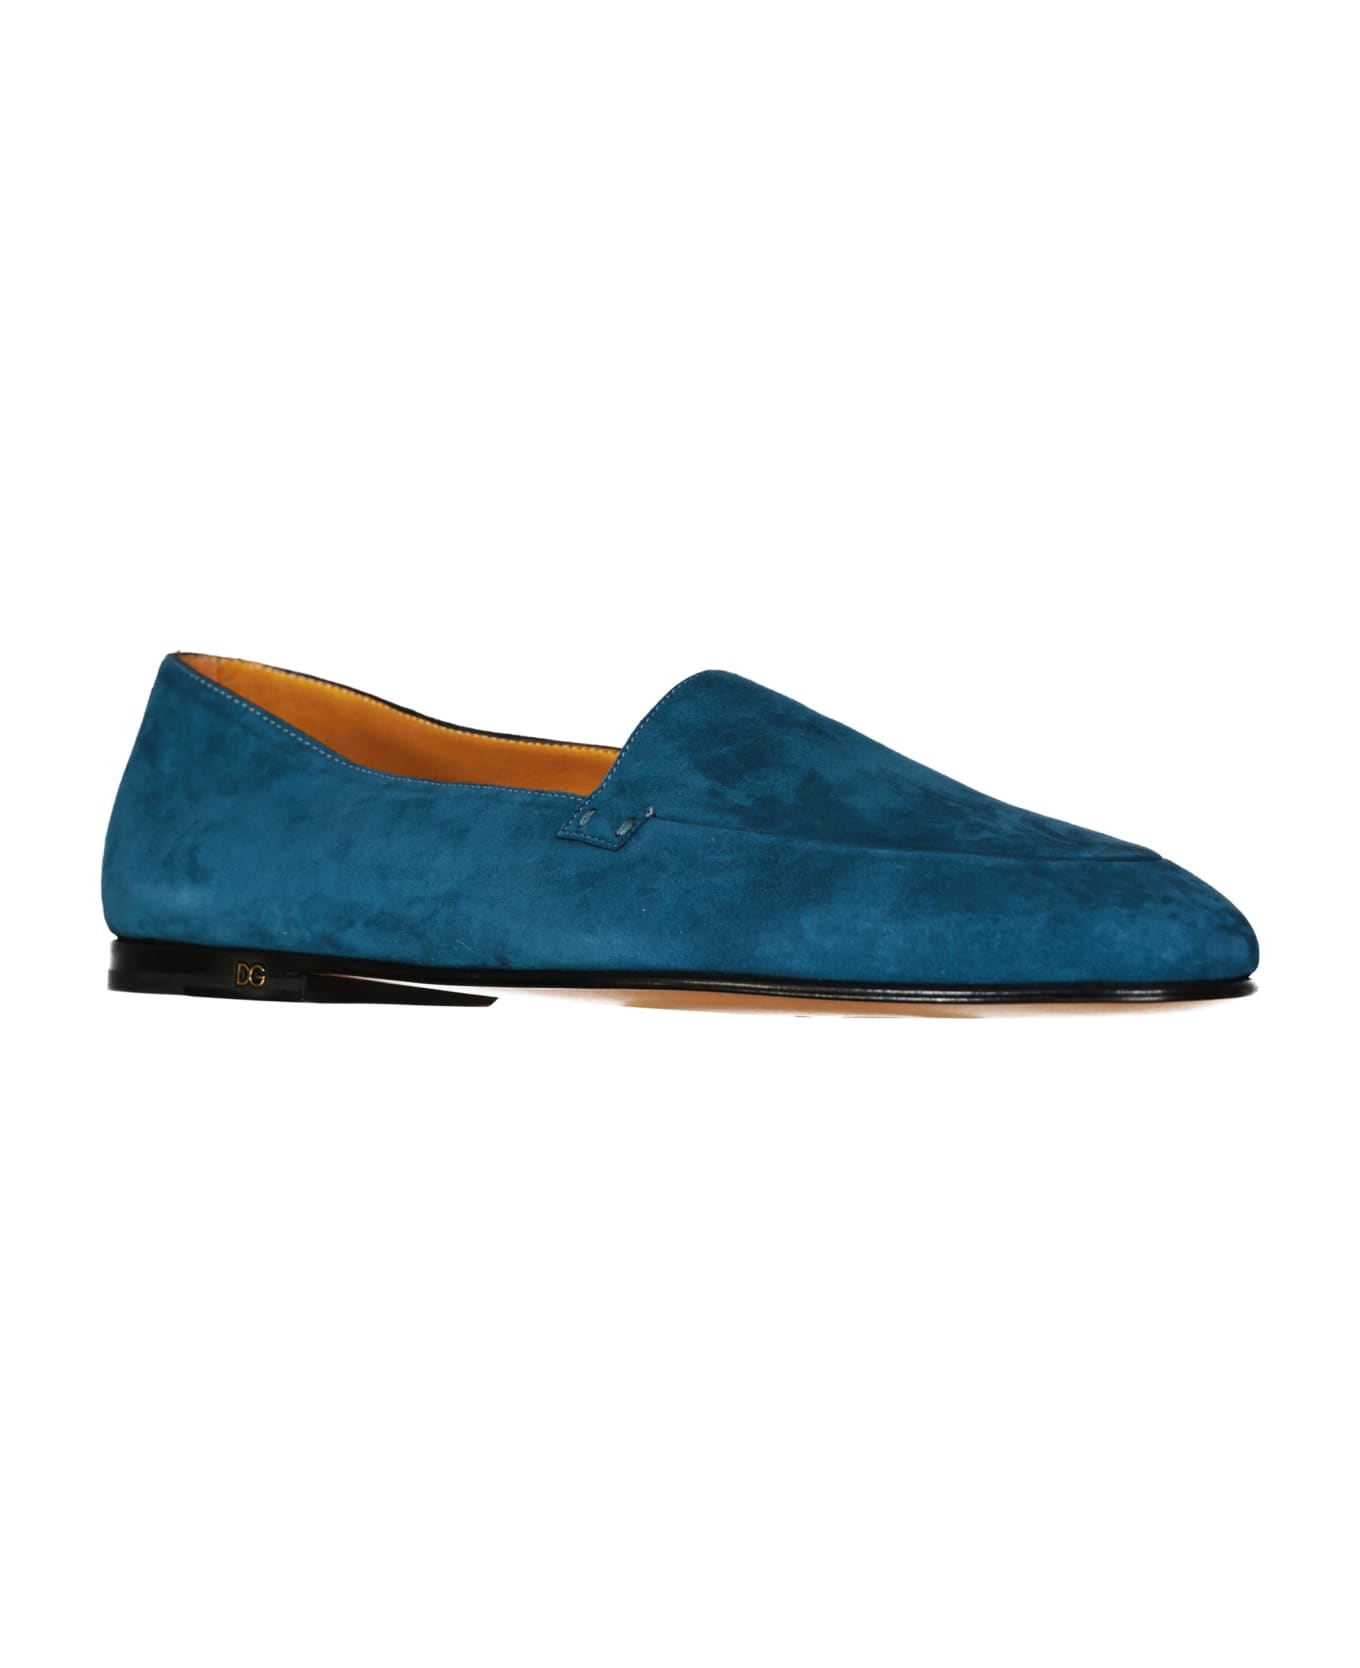 Dolce & Gabbana Suede Loafers - Blue